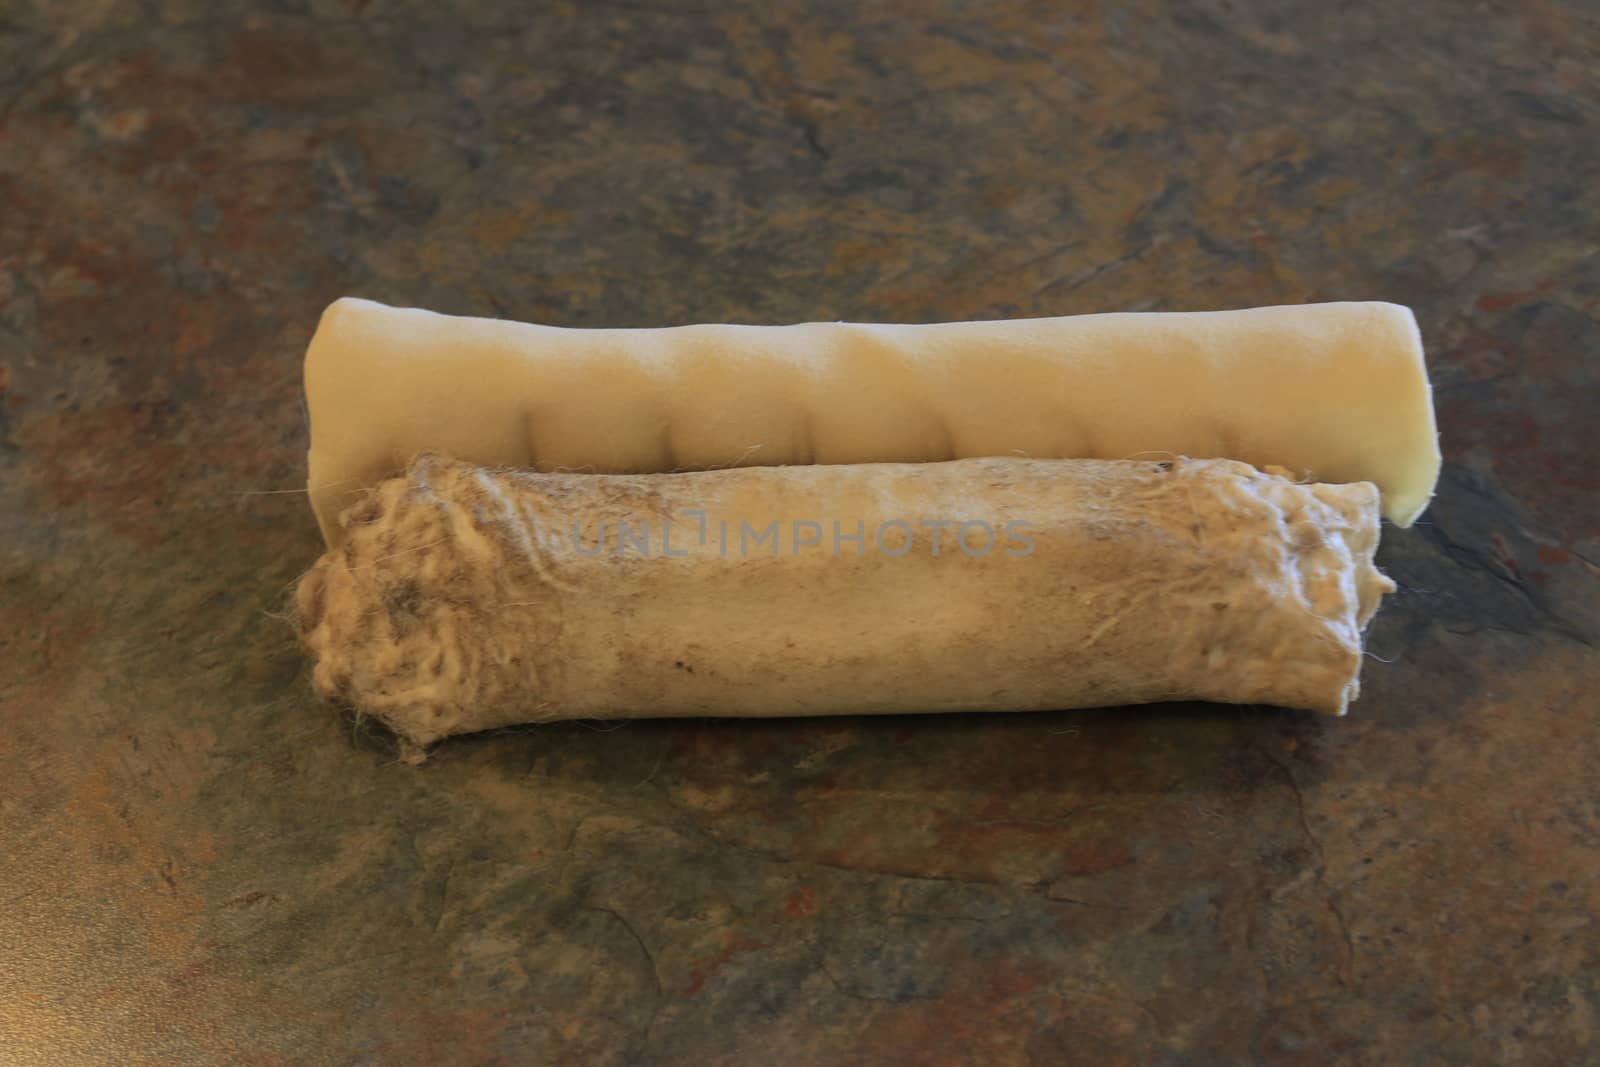 rawhide is considered a controversial dog chew due to the risk of dogs choking. Photo showing partly chewed rawhide by mynewturtle1